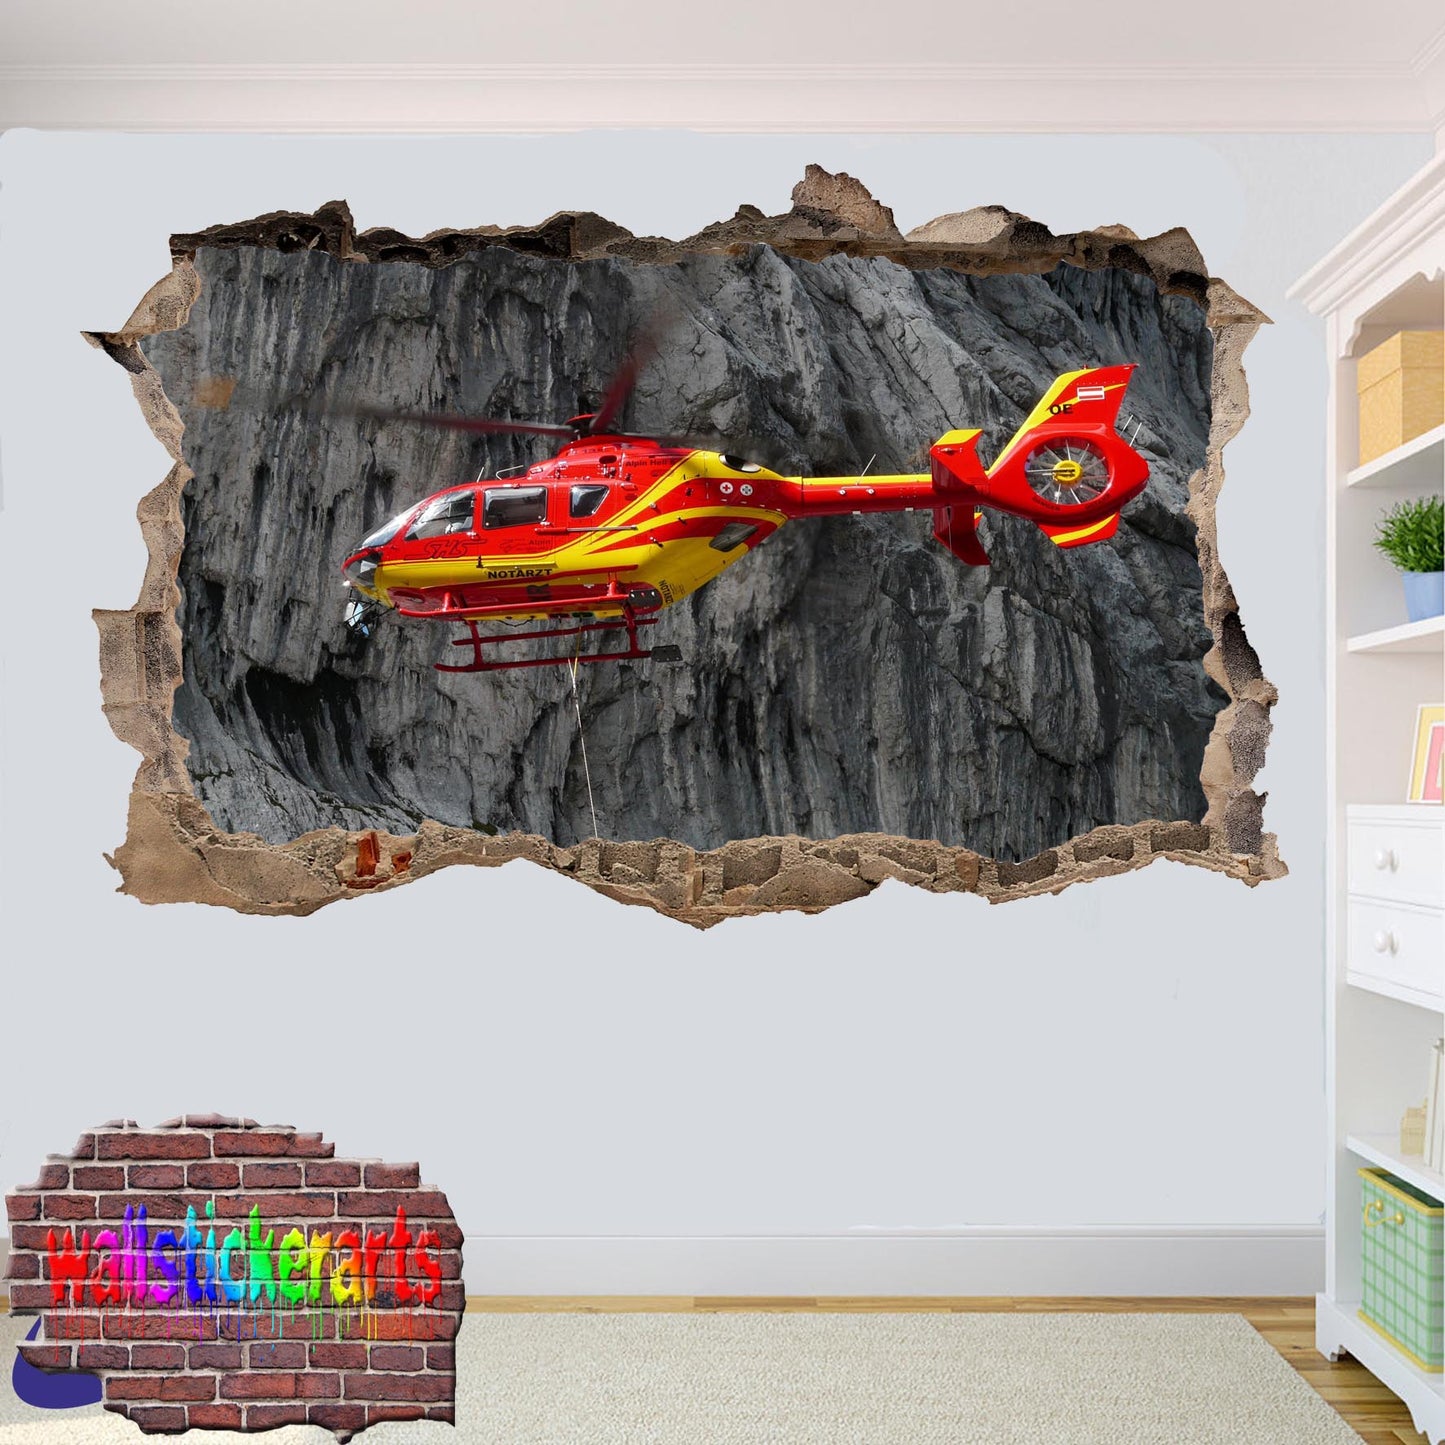 Resque Helicopter 3d Art Smashed Effect Wall Sticker Room Office Nursery Shop Decor Decal Mural YK5